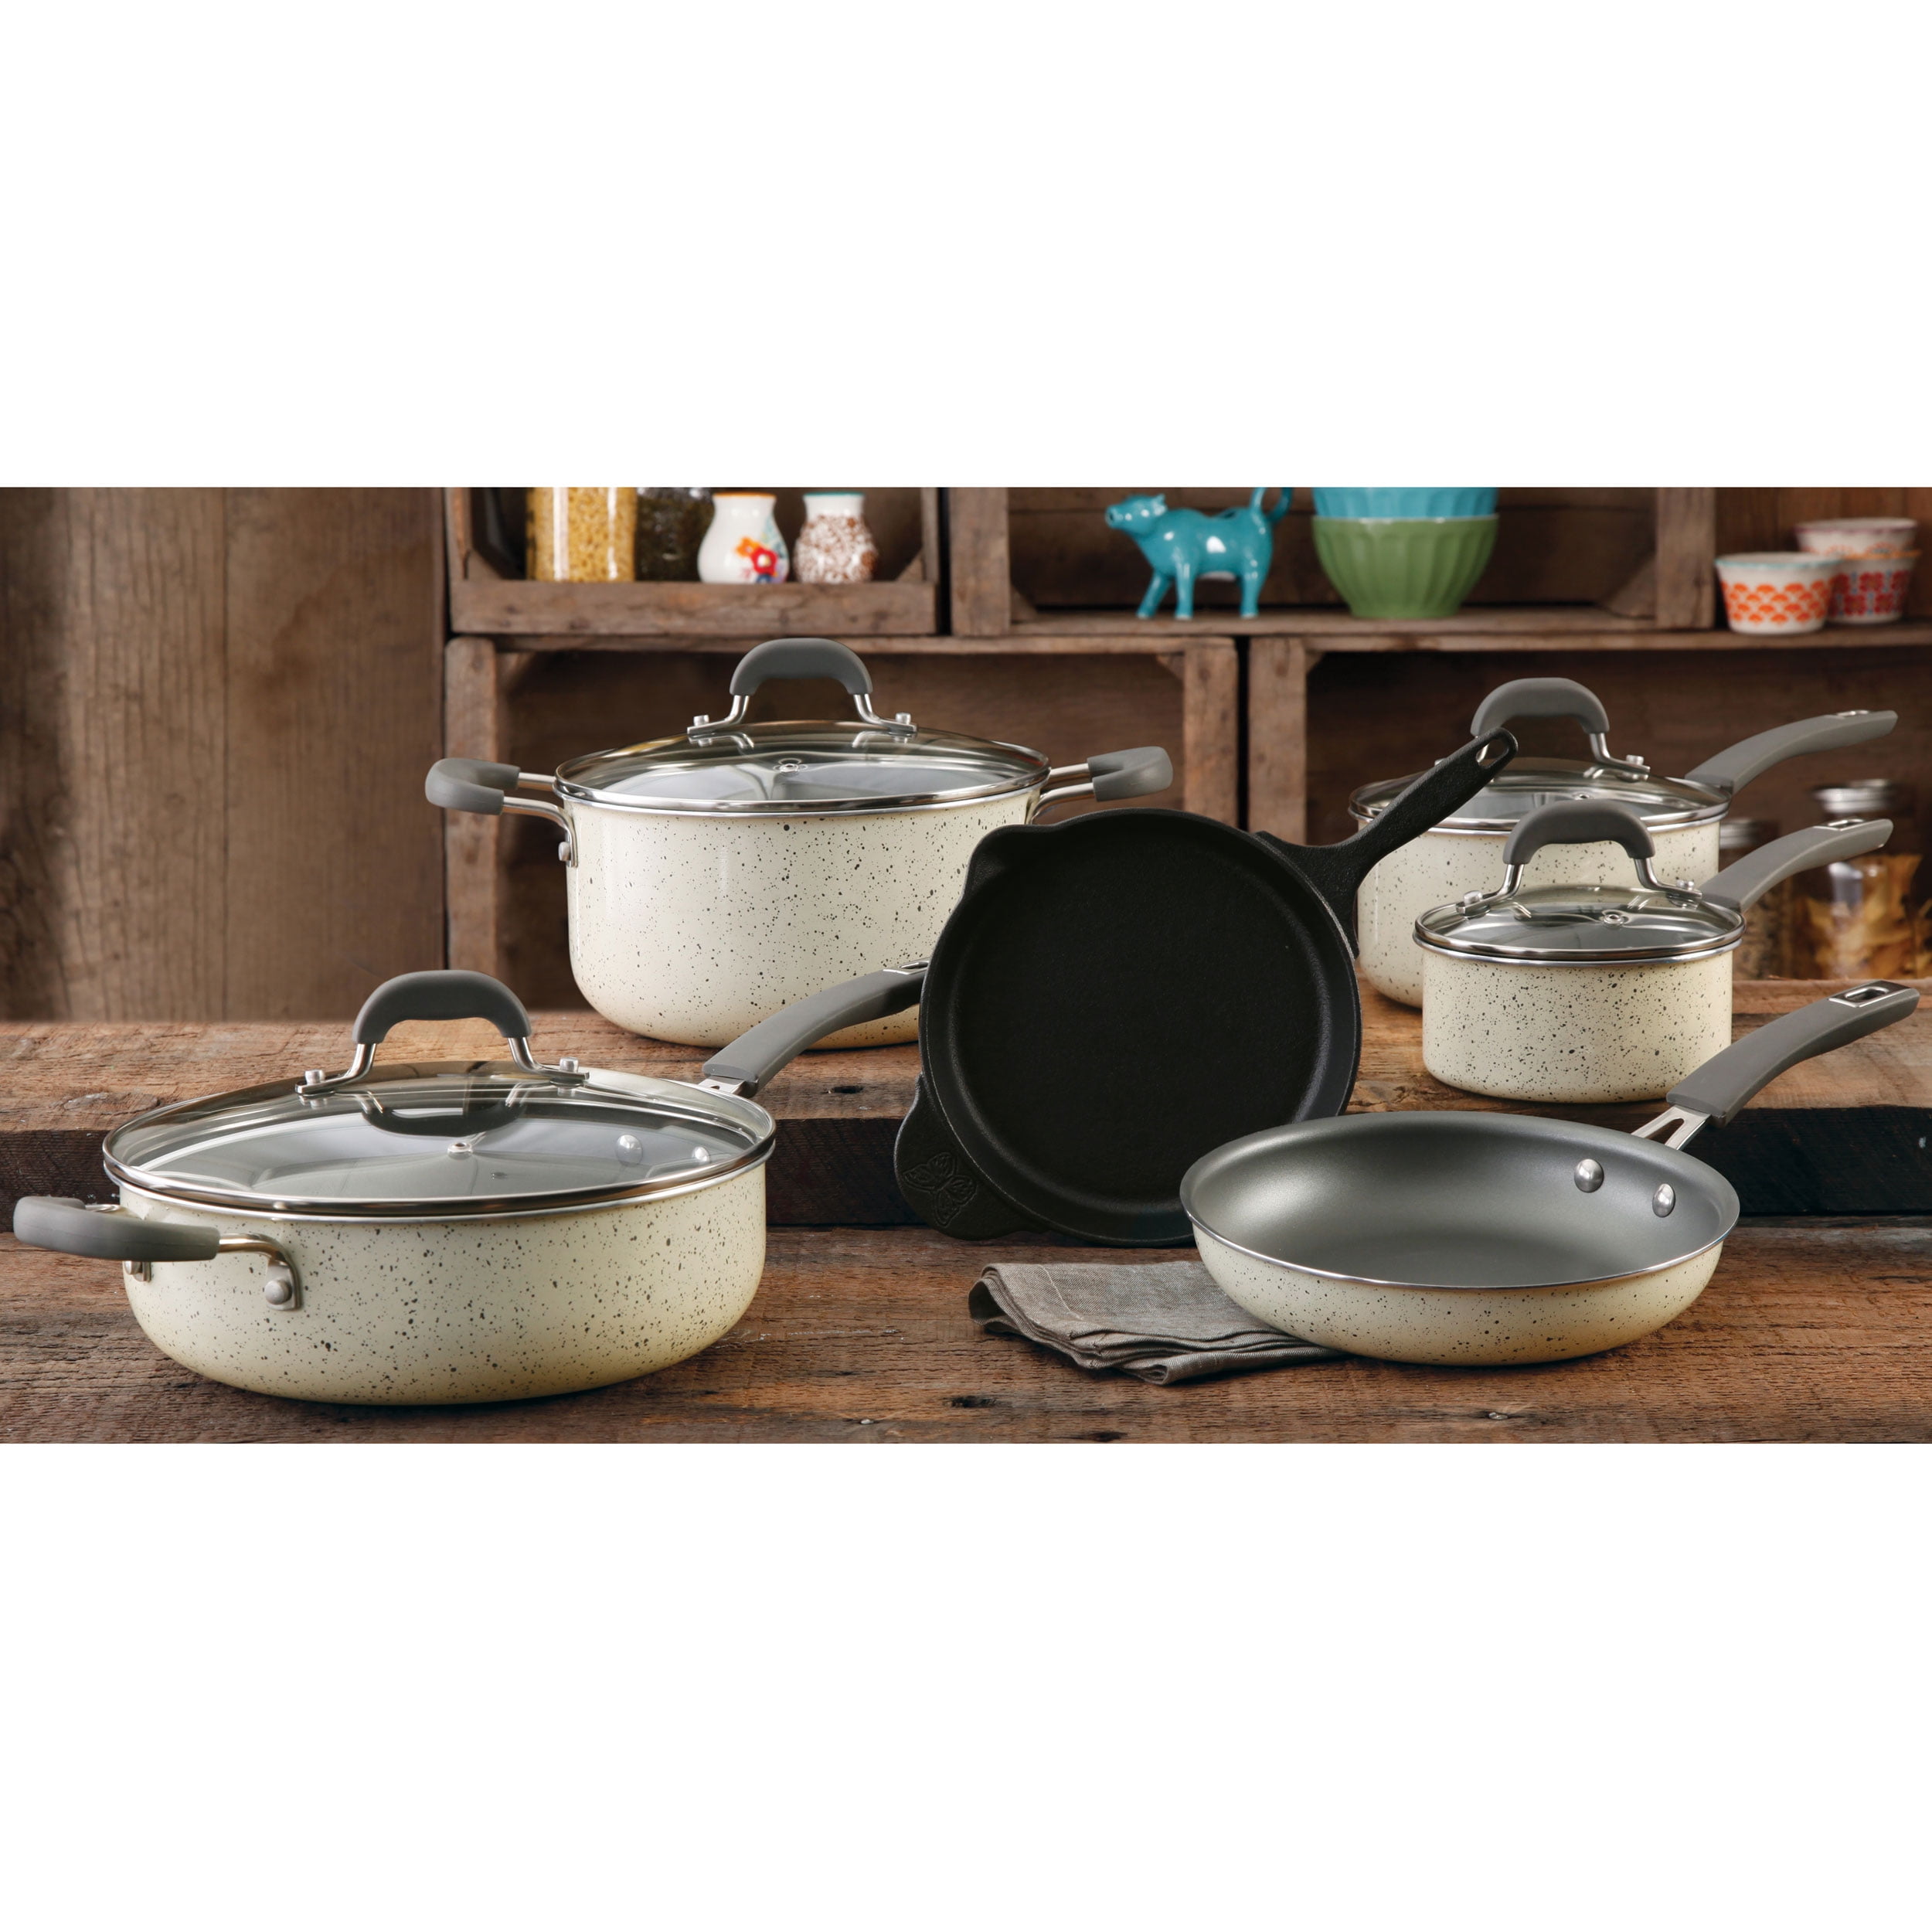 The Pioneer Woman Floral Pattern Ceramic Nonstick Cookware Set 10 Pieces for sale online 